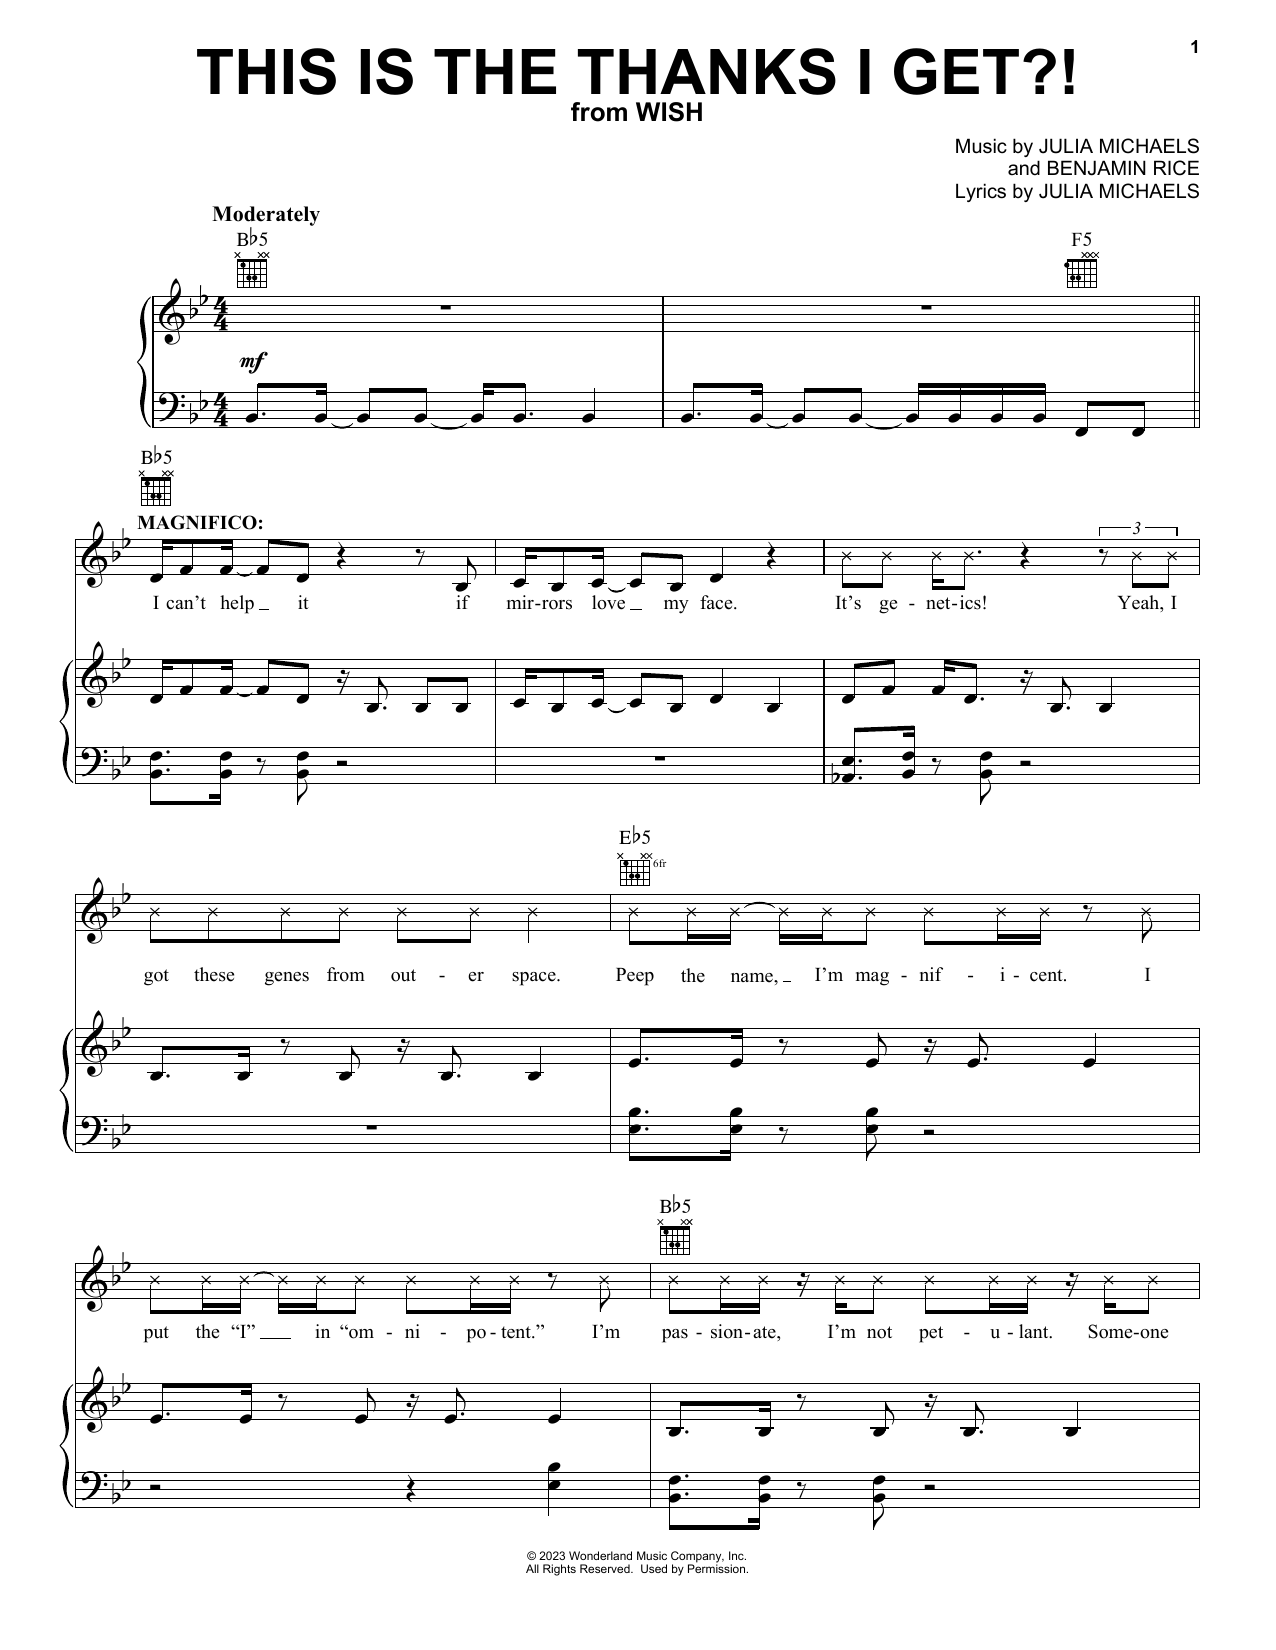 Chris Pine This Is The Thanks I Get?! (from Wish) sheet music notes printable PDF score